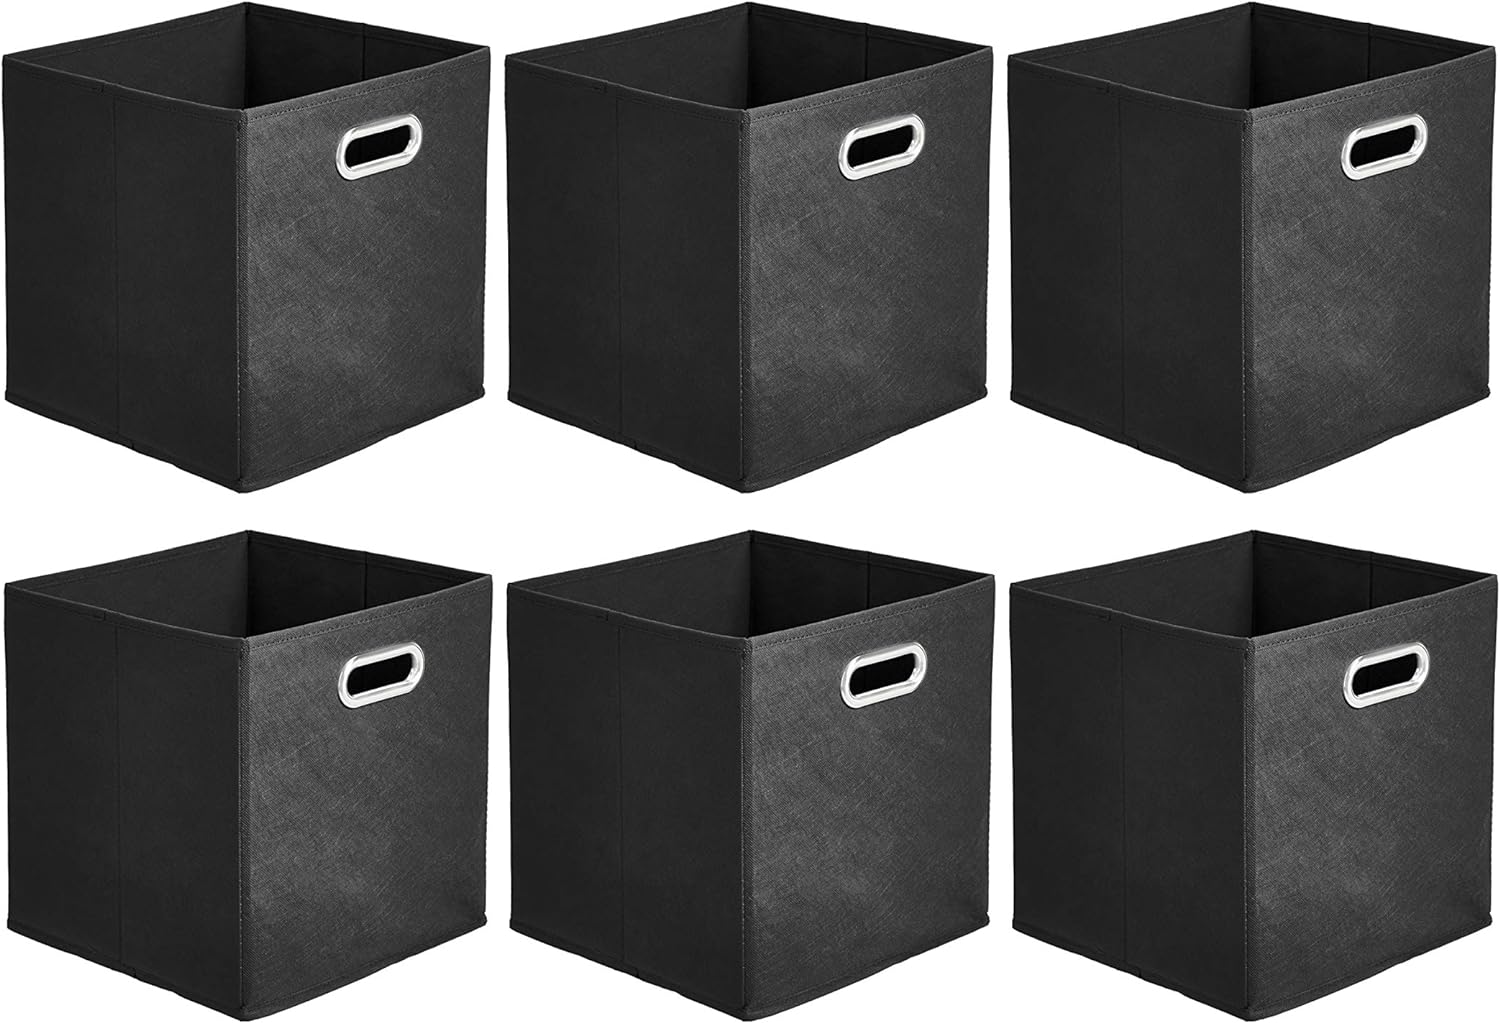 Amazon Basics Collapsible Fabric Storage Cubes with Oval Grommets - 6-Pack, Black